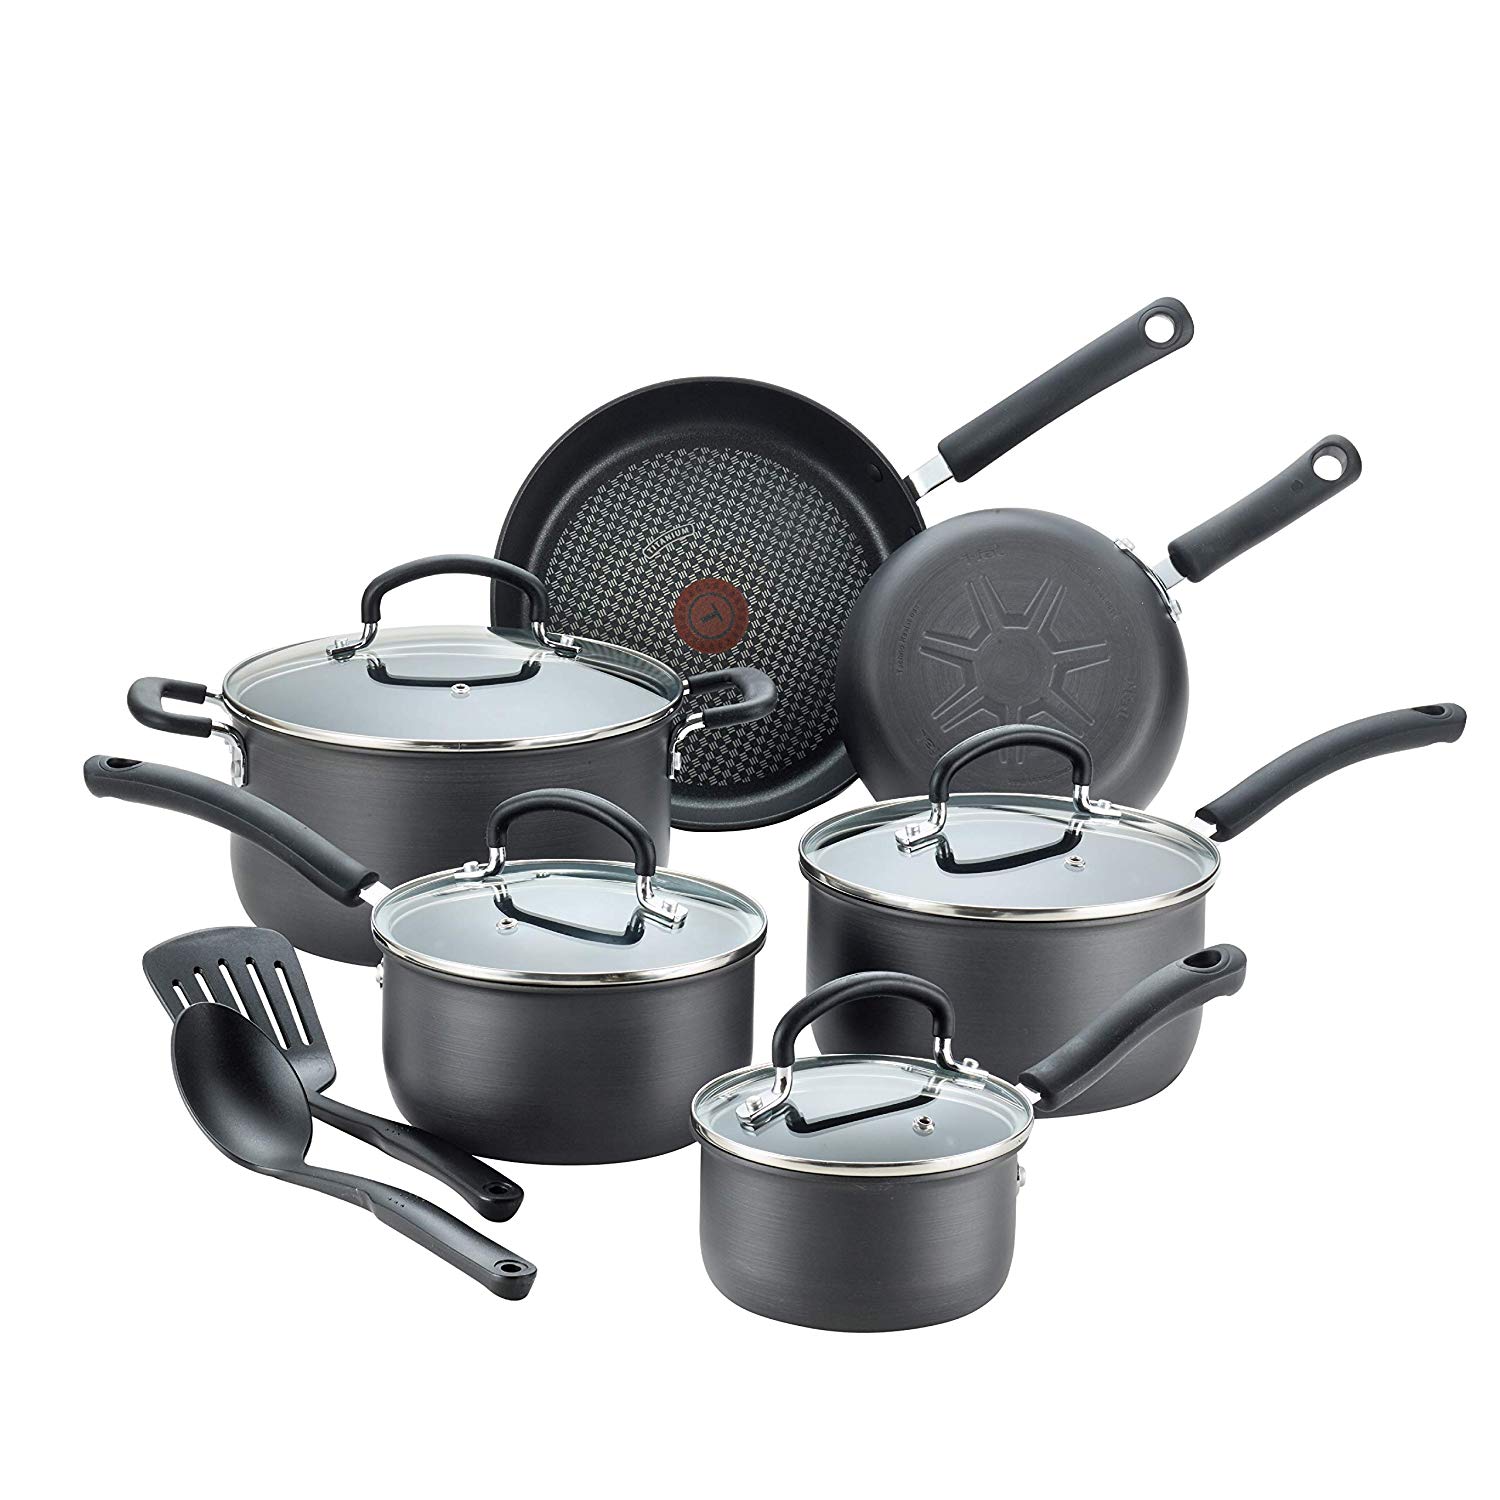 T-fal E765SC Ultimate Hard Anodized Nonstick 12 Piece Cookware Set, Dishwasher Safe Pots and 